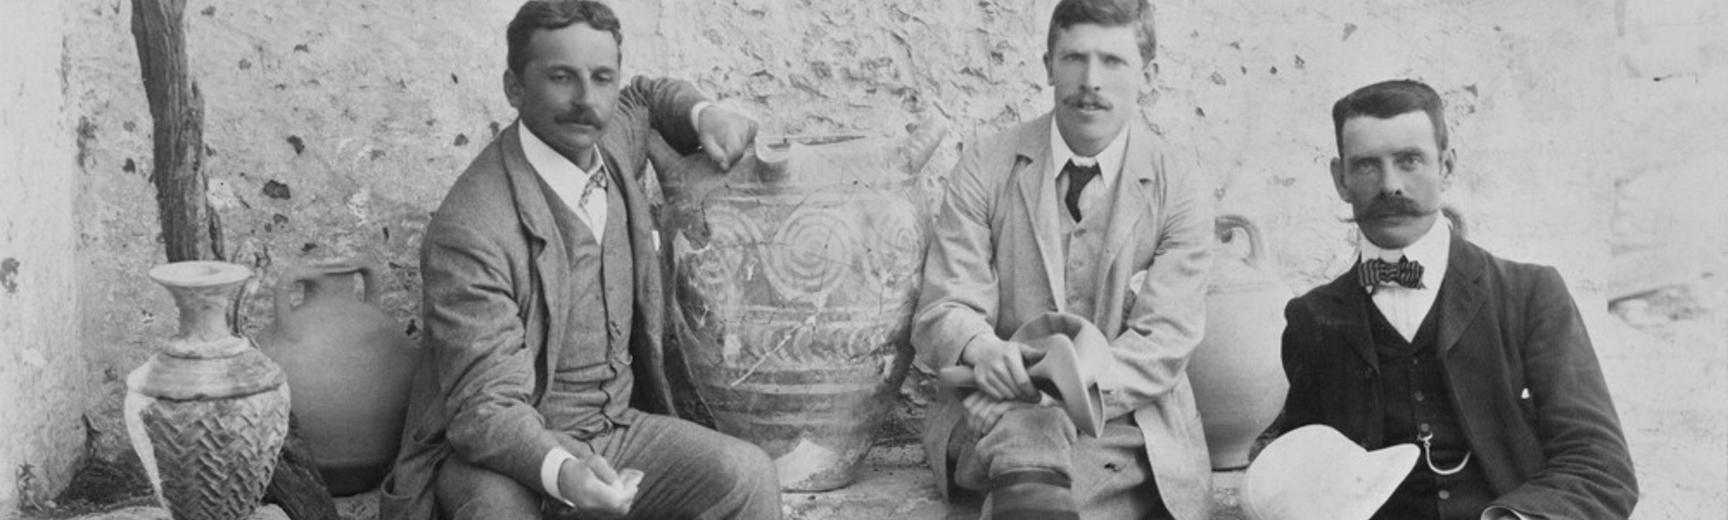 Black & white photograph of three men with ancient pottery